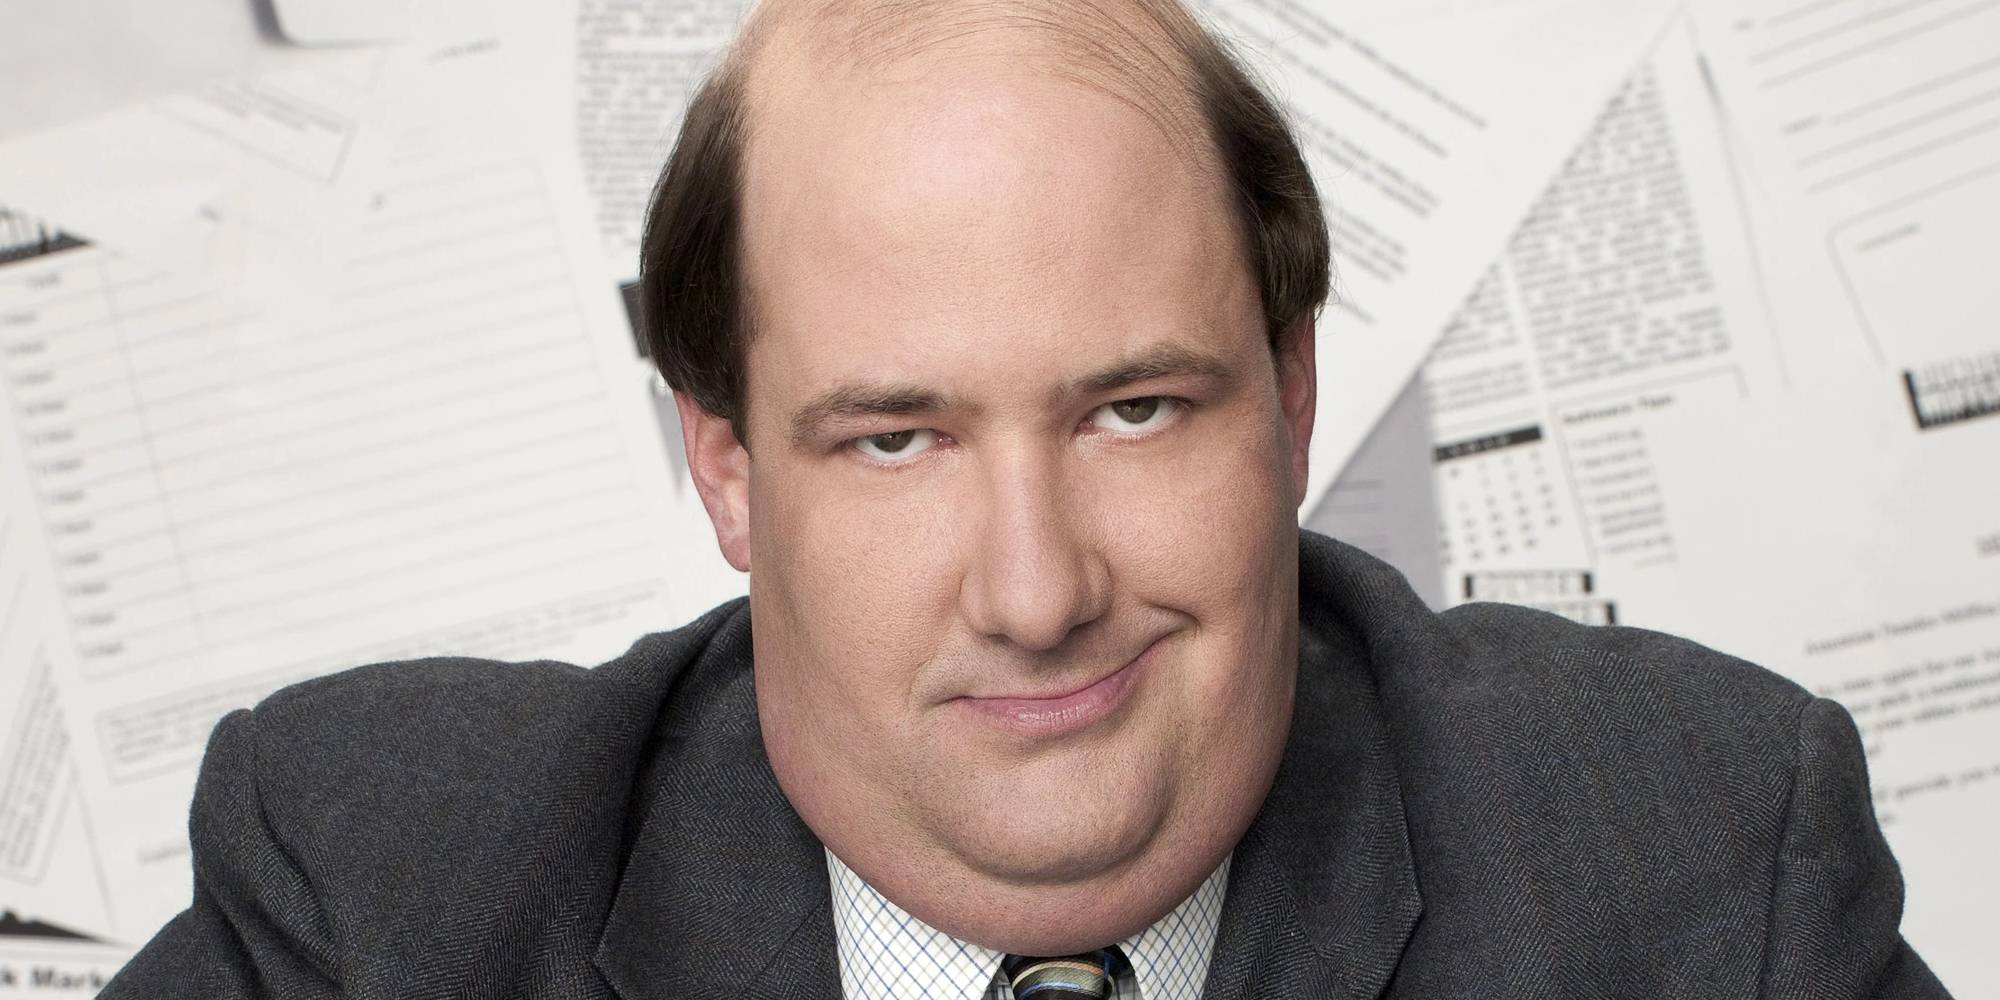 Kevin Malone promotional.jpg?q=50&fit=crop&dpr=1